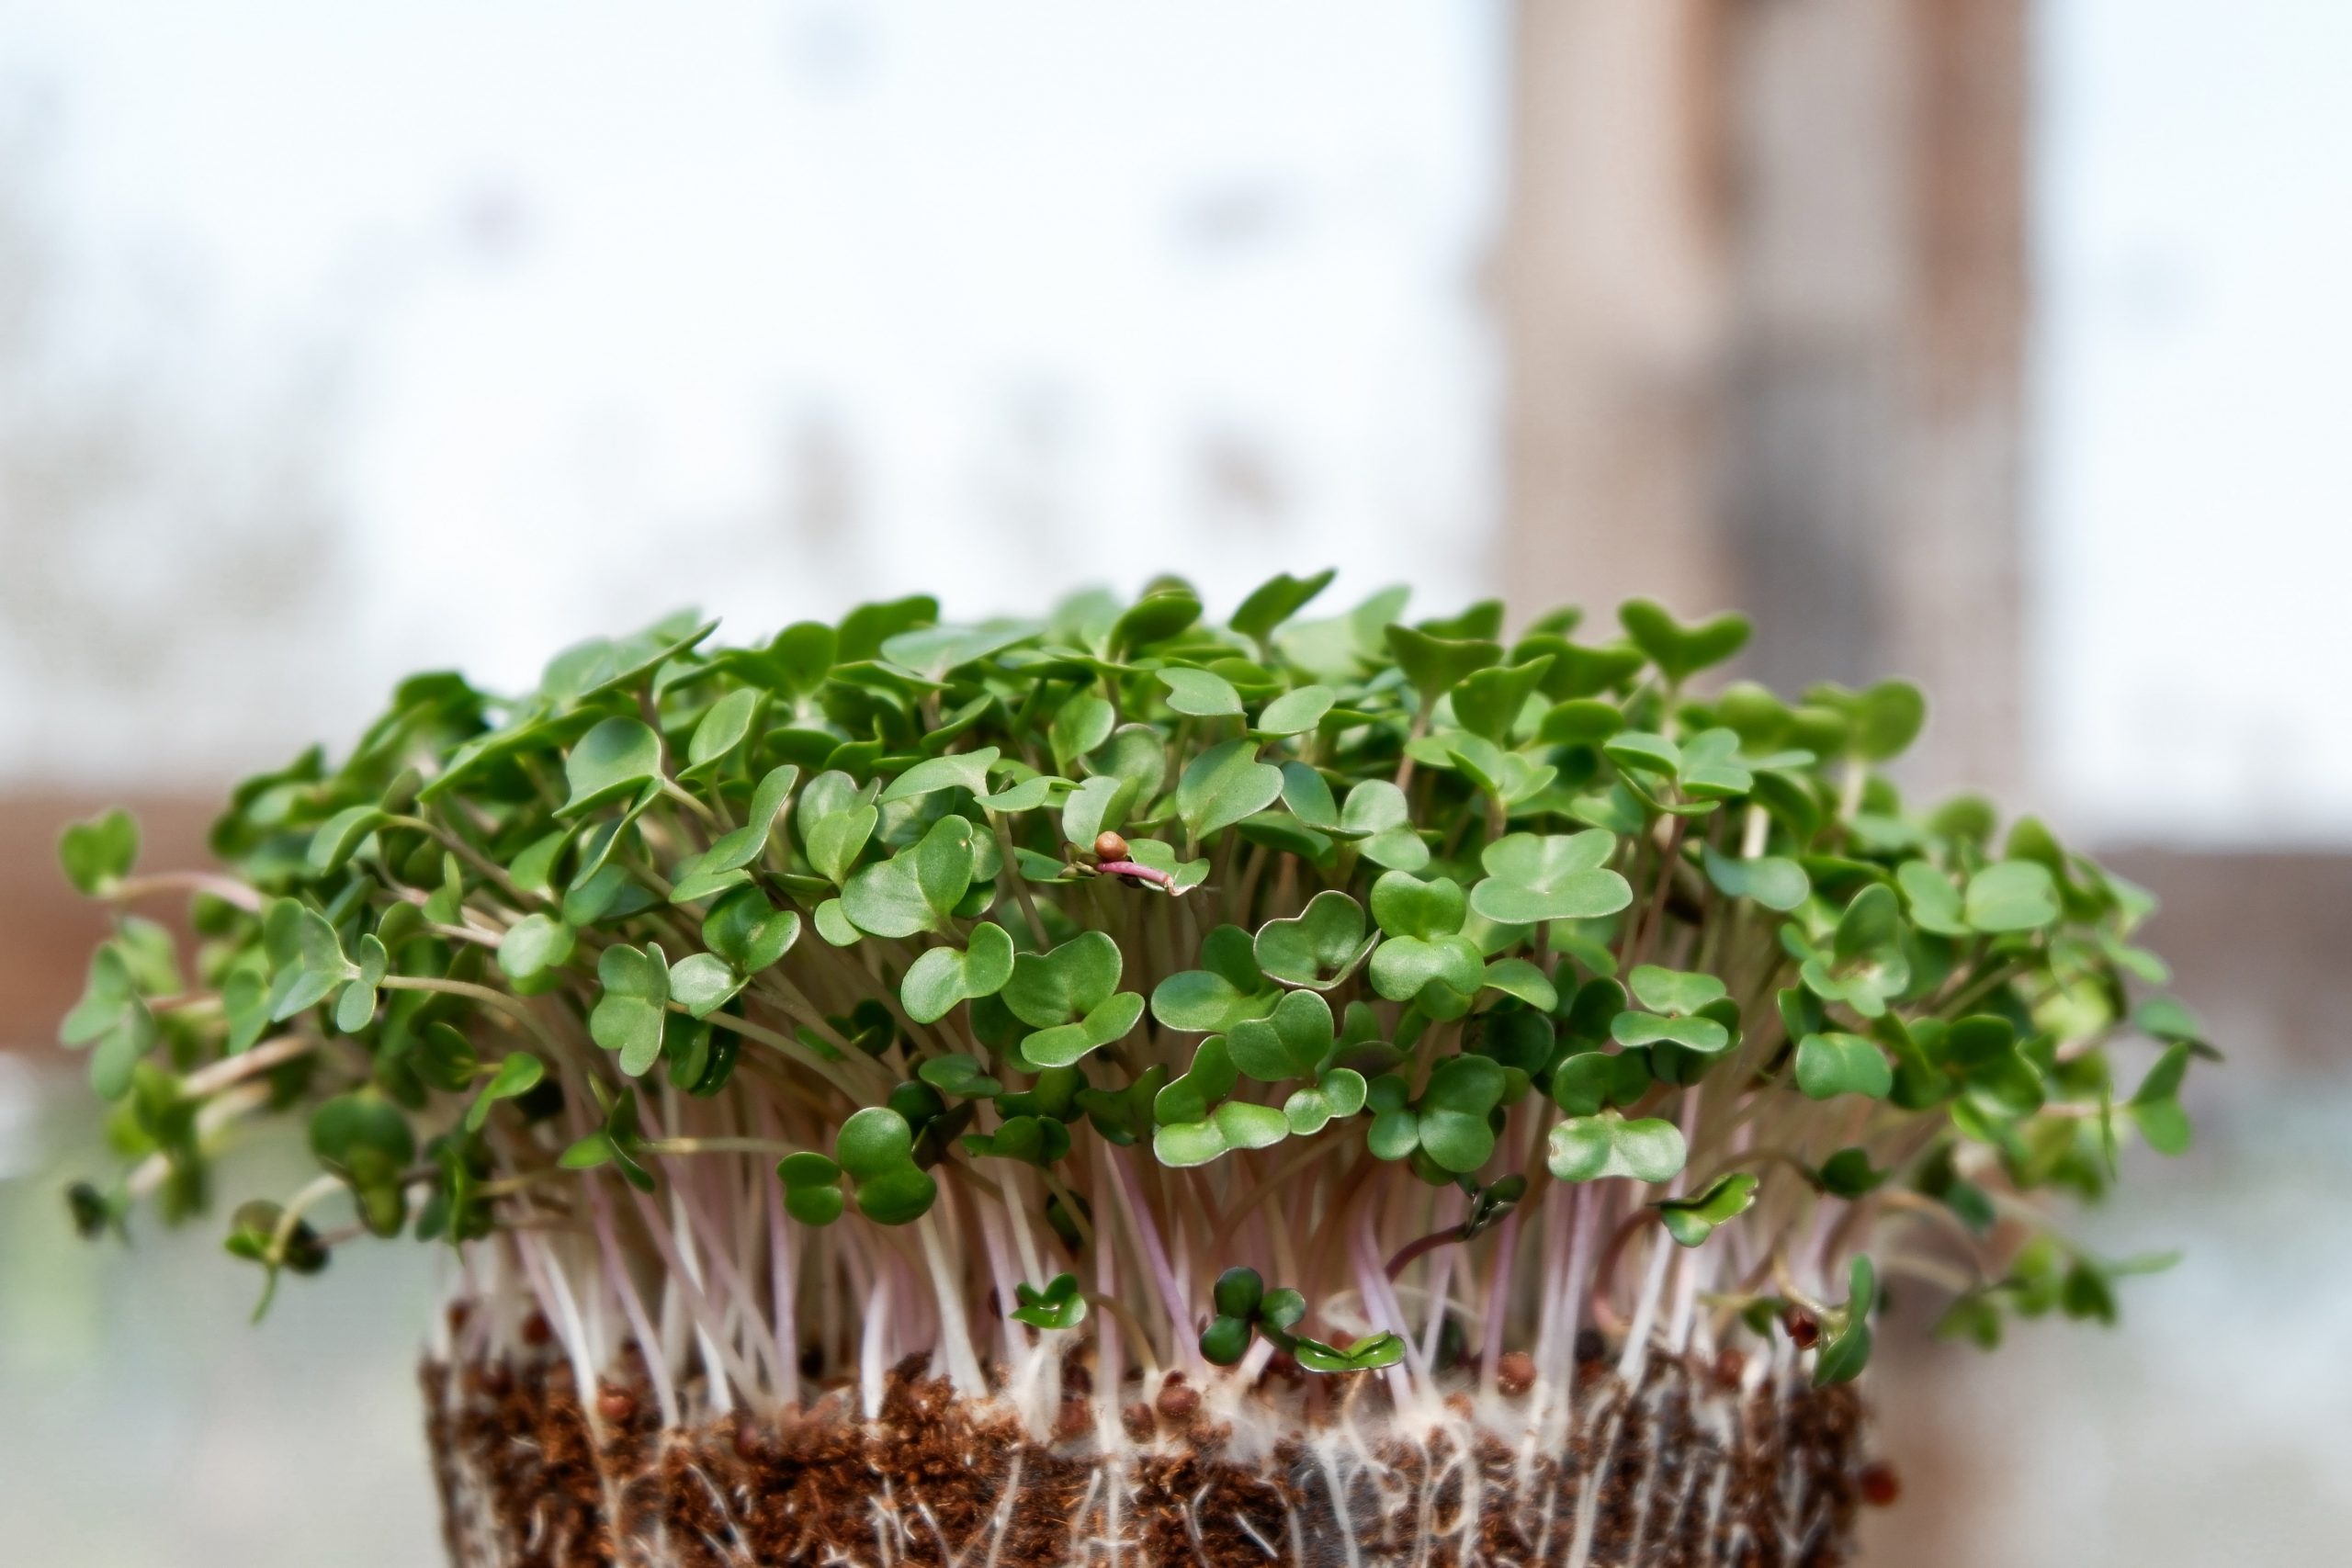 Microgreens: Nutrients that pack a punch